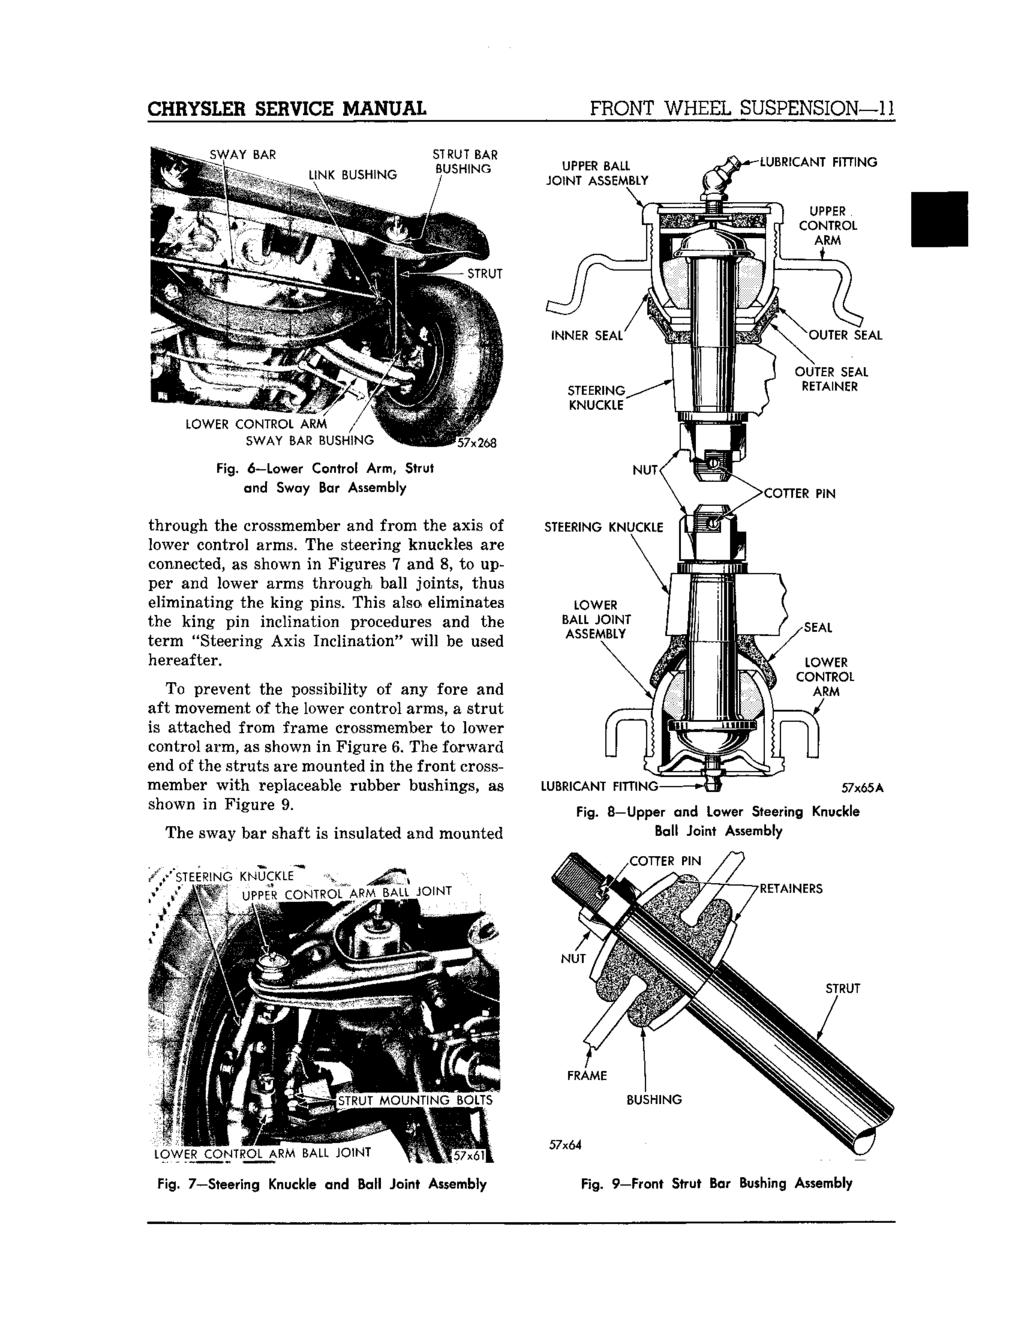 CHRYSLER SERVICE MANUAL FRONT WHEEL SUSPENSION 11 Fig. 6 Lower Control Arm, Strut and Sway Bar Assembly through the crossmember and from the axis of lower control arms.